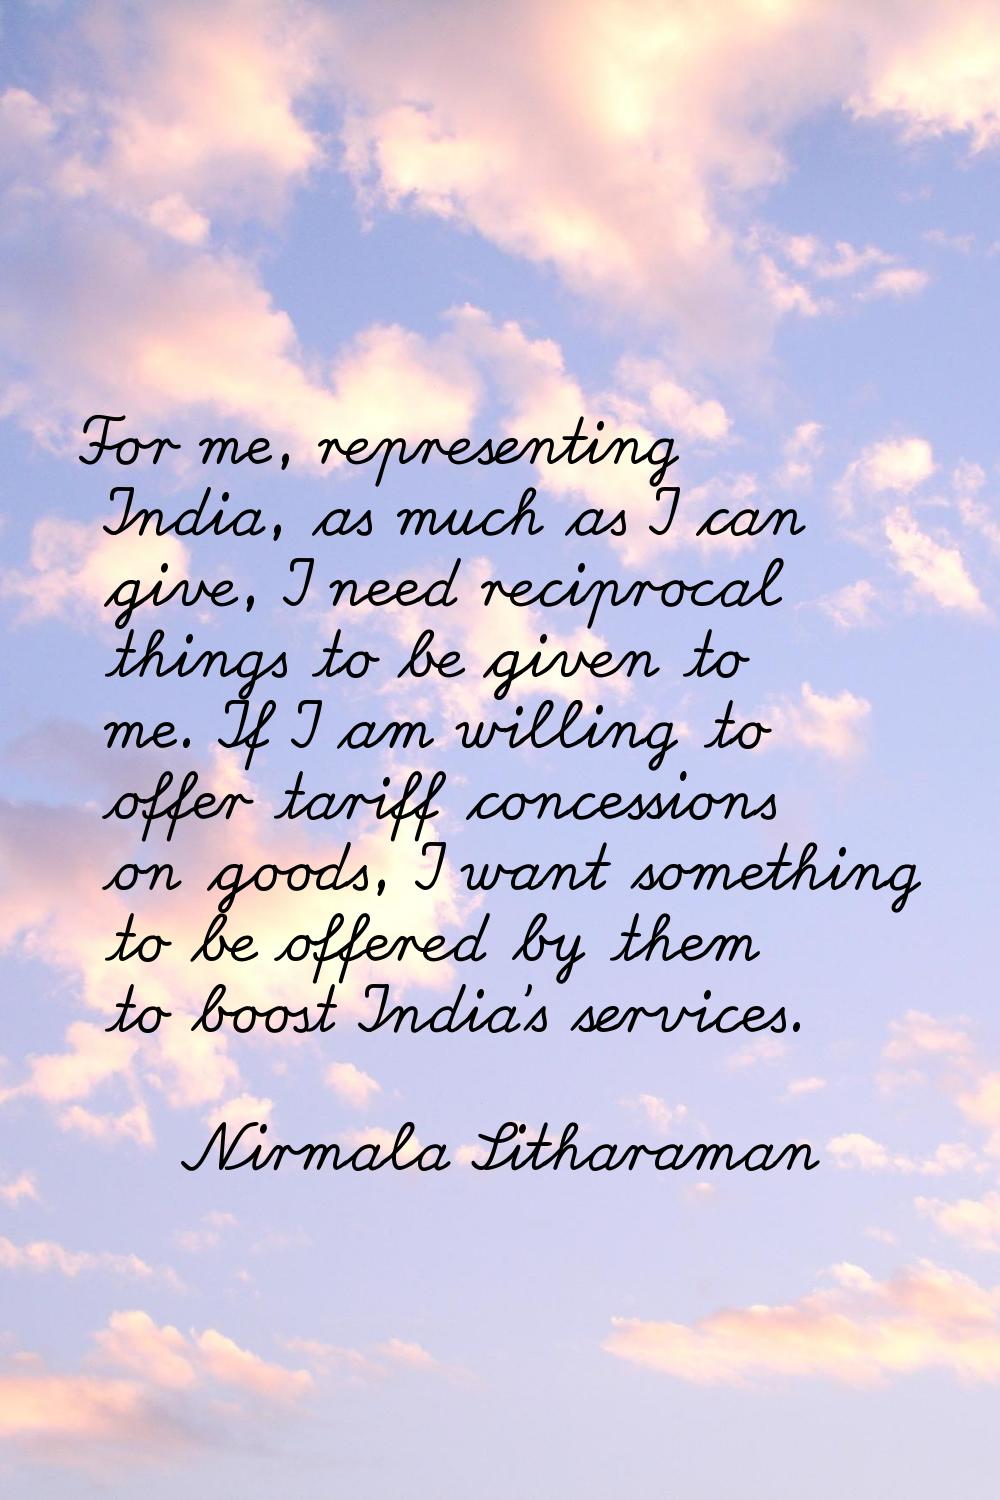 For me, representing India, as much as I can give, I need reciprocal things to be given to me. If I